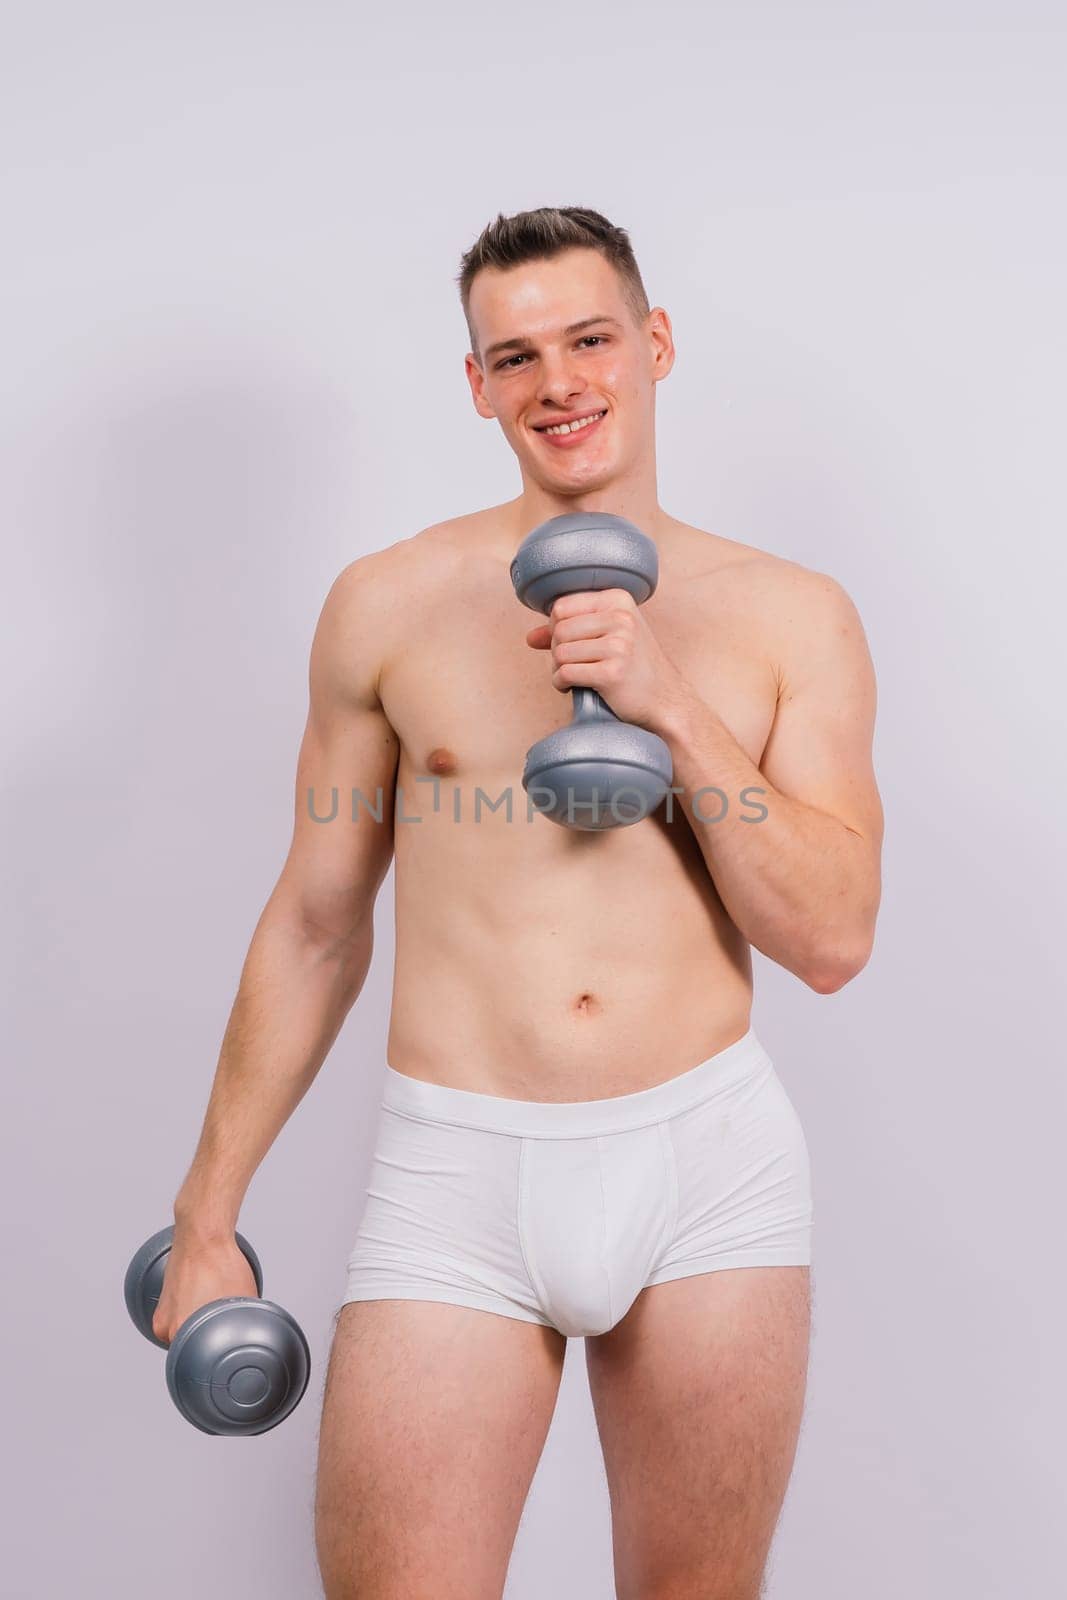 Shirtless bodybuilder holding a dumbell and showing his muscular arms.